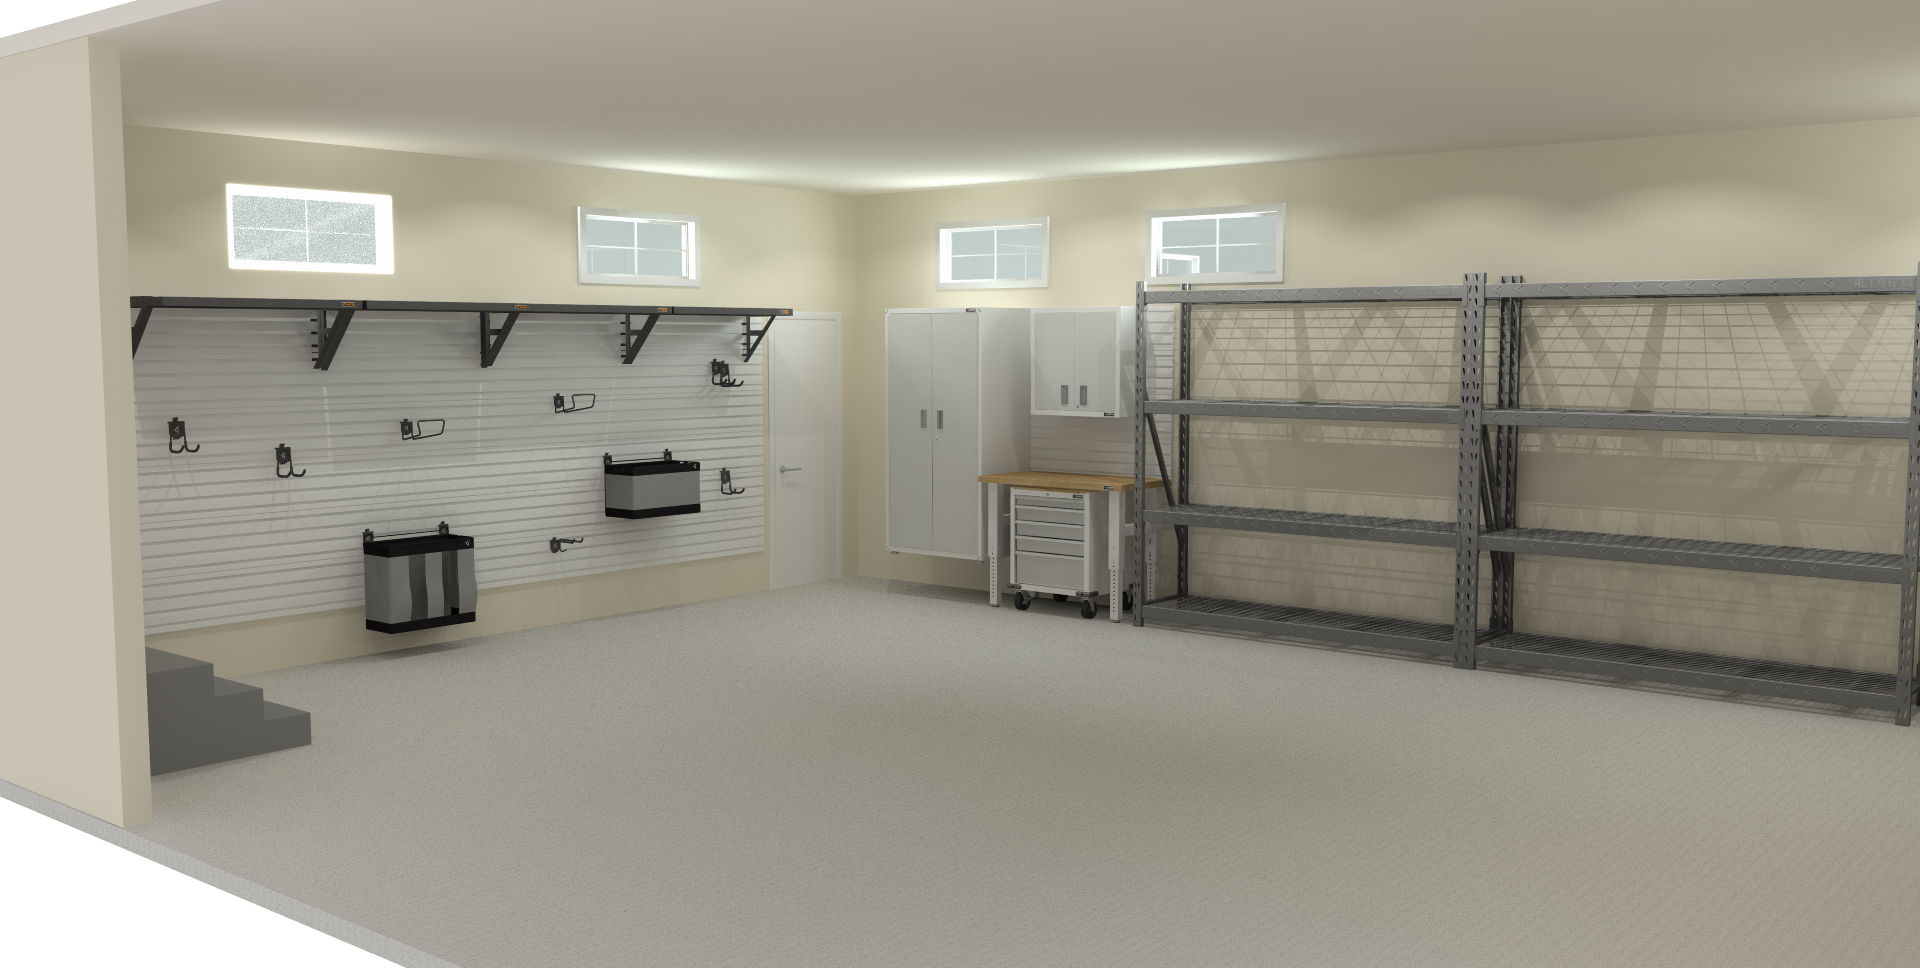 Rendering of a garage with shelves and cabinets.